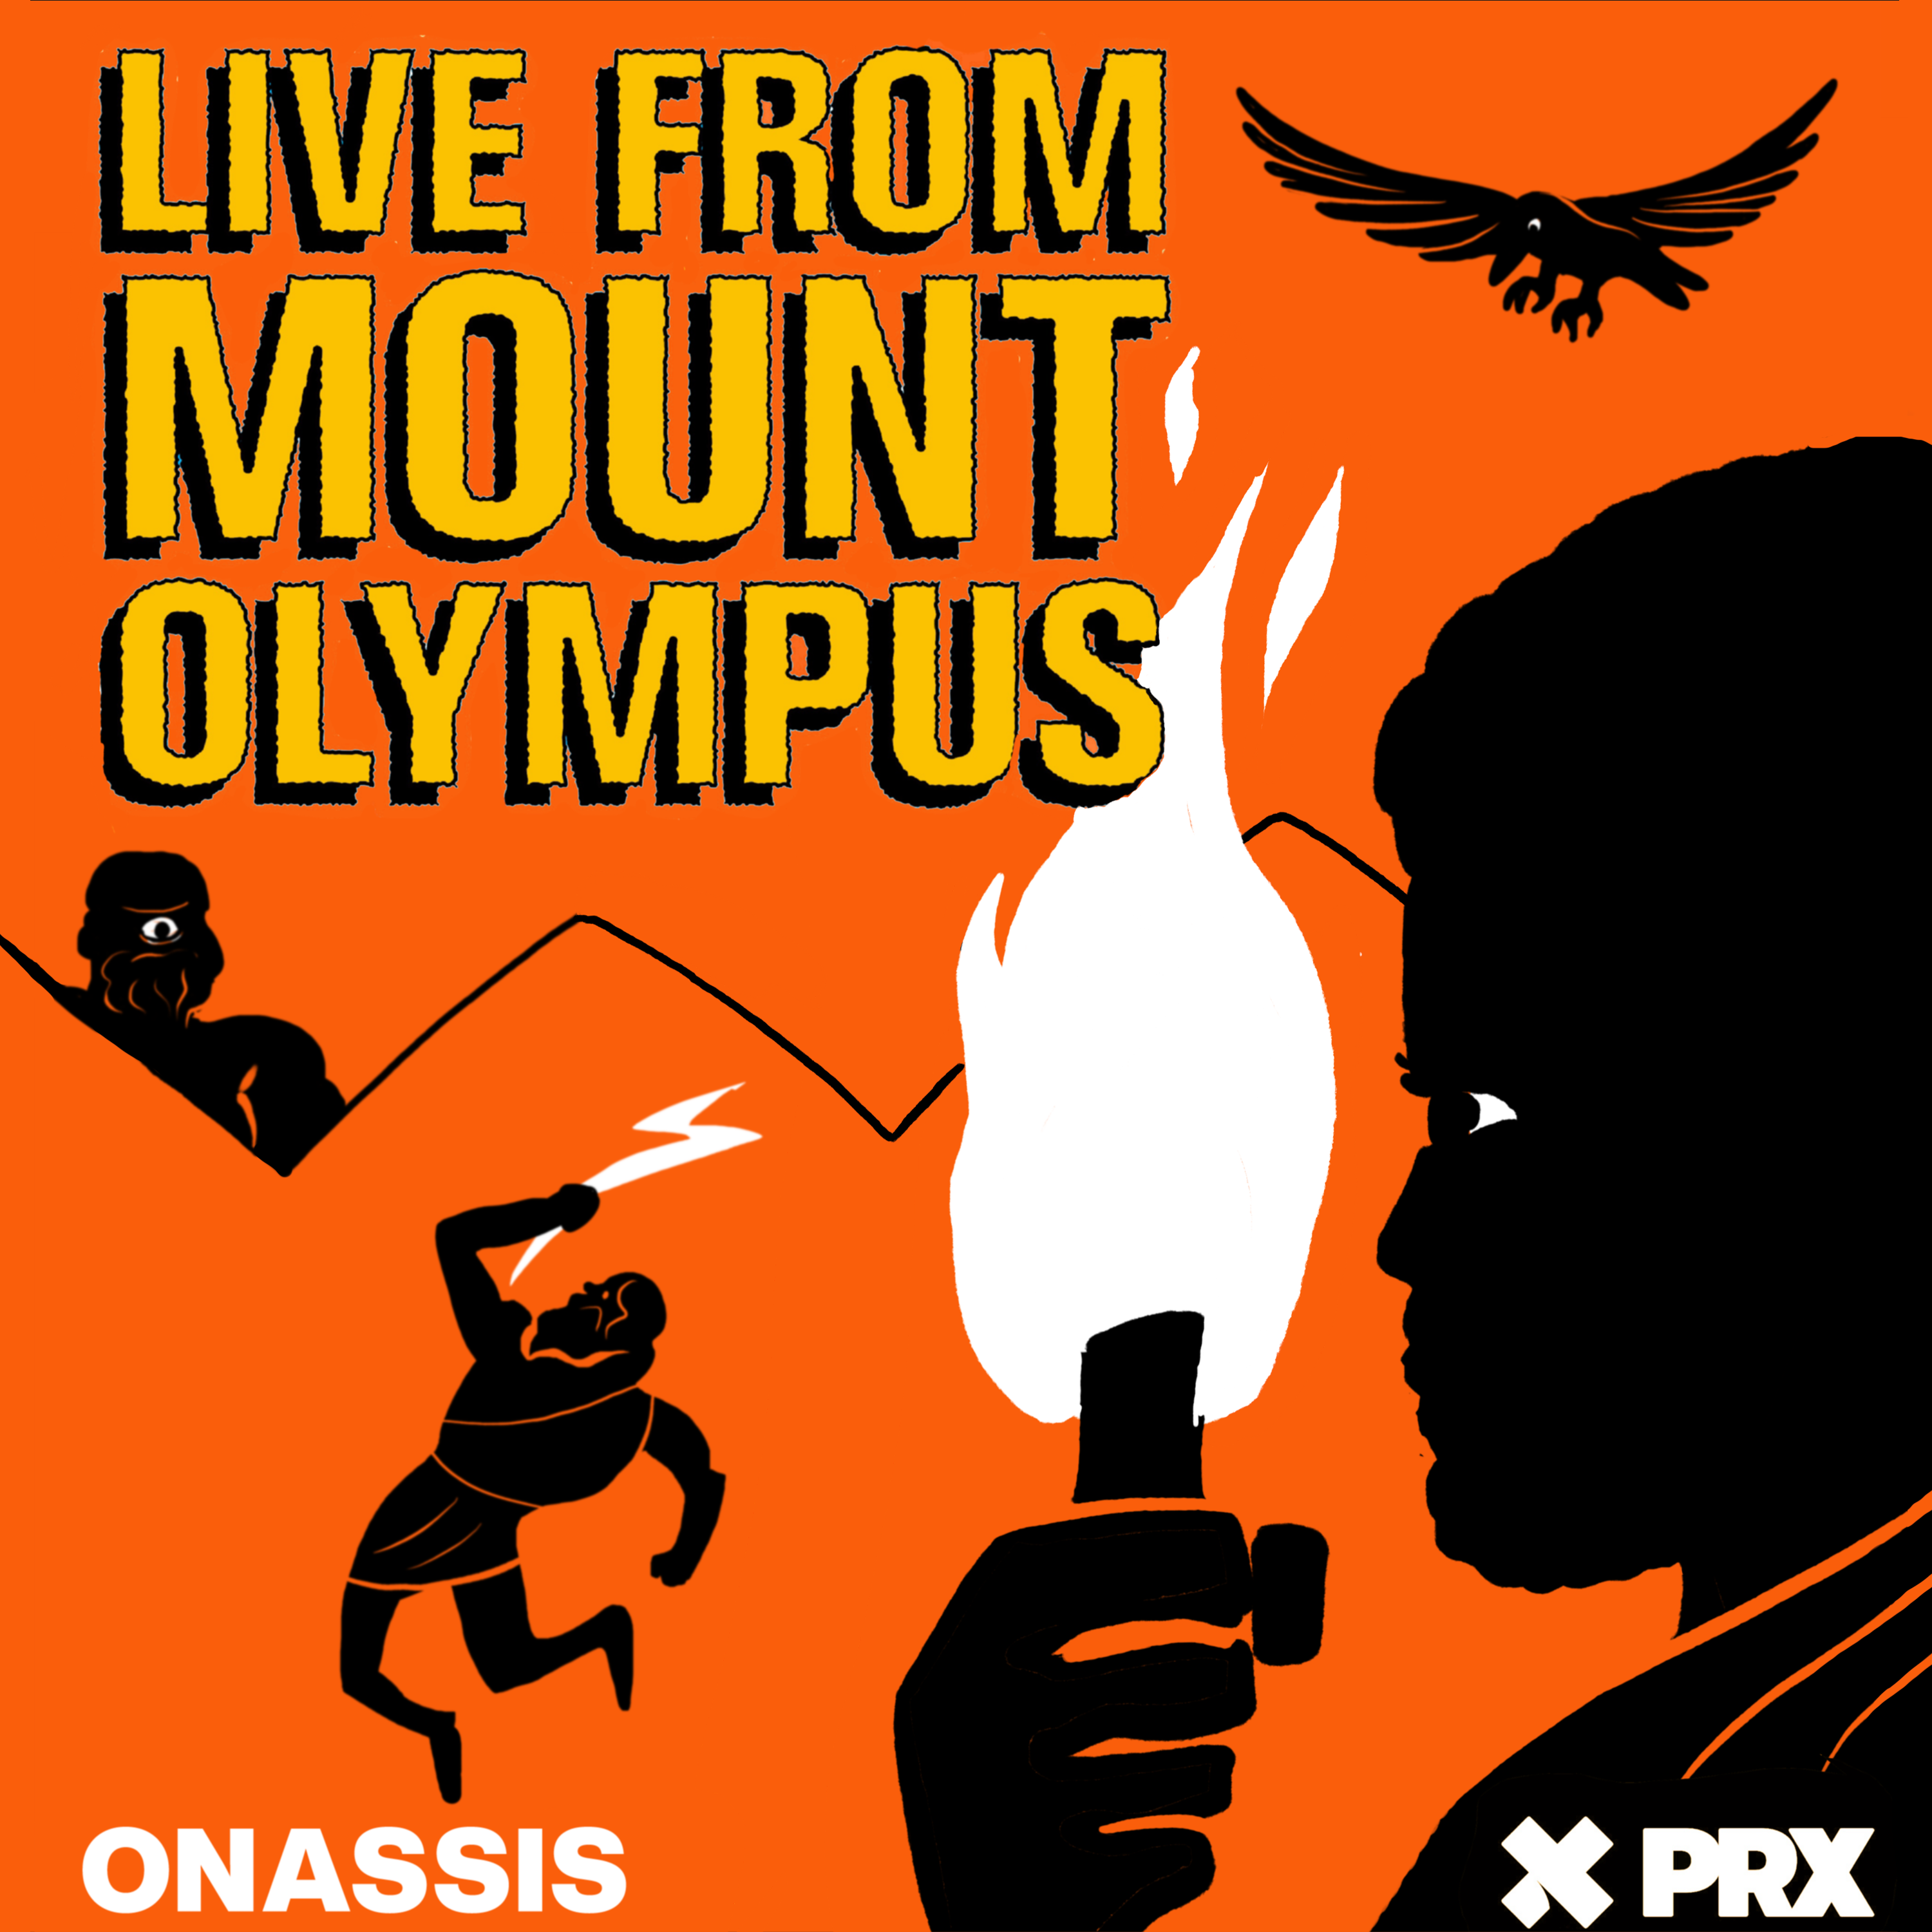 Live from Mount Olympus podcast show image